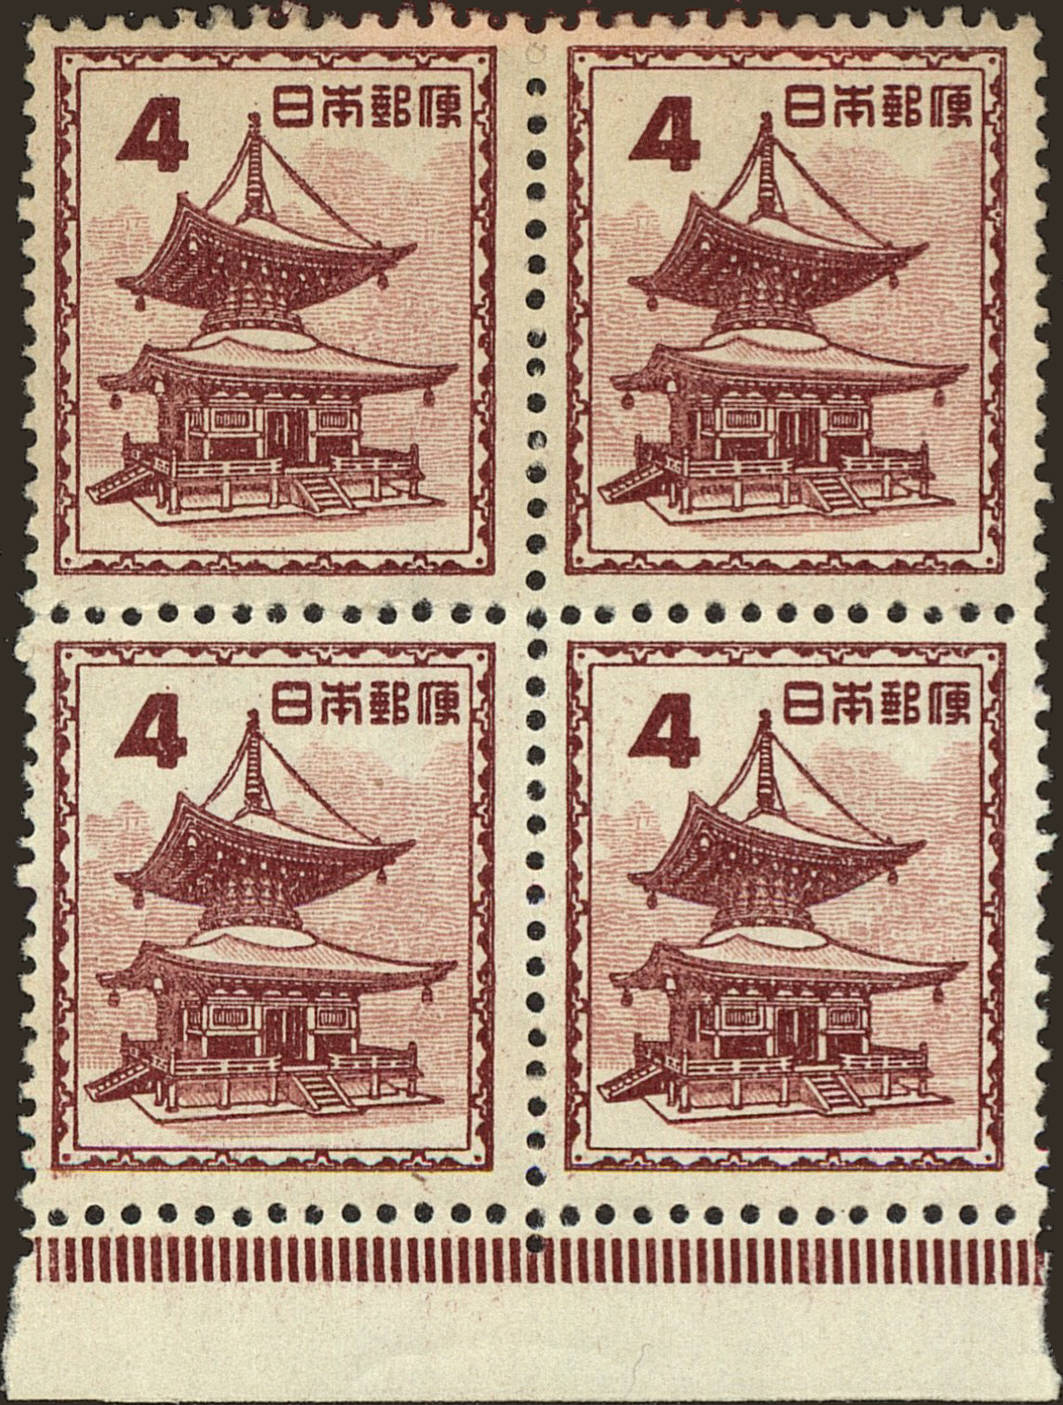 Front view of Japan 559 collectors stamp